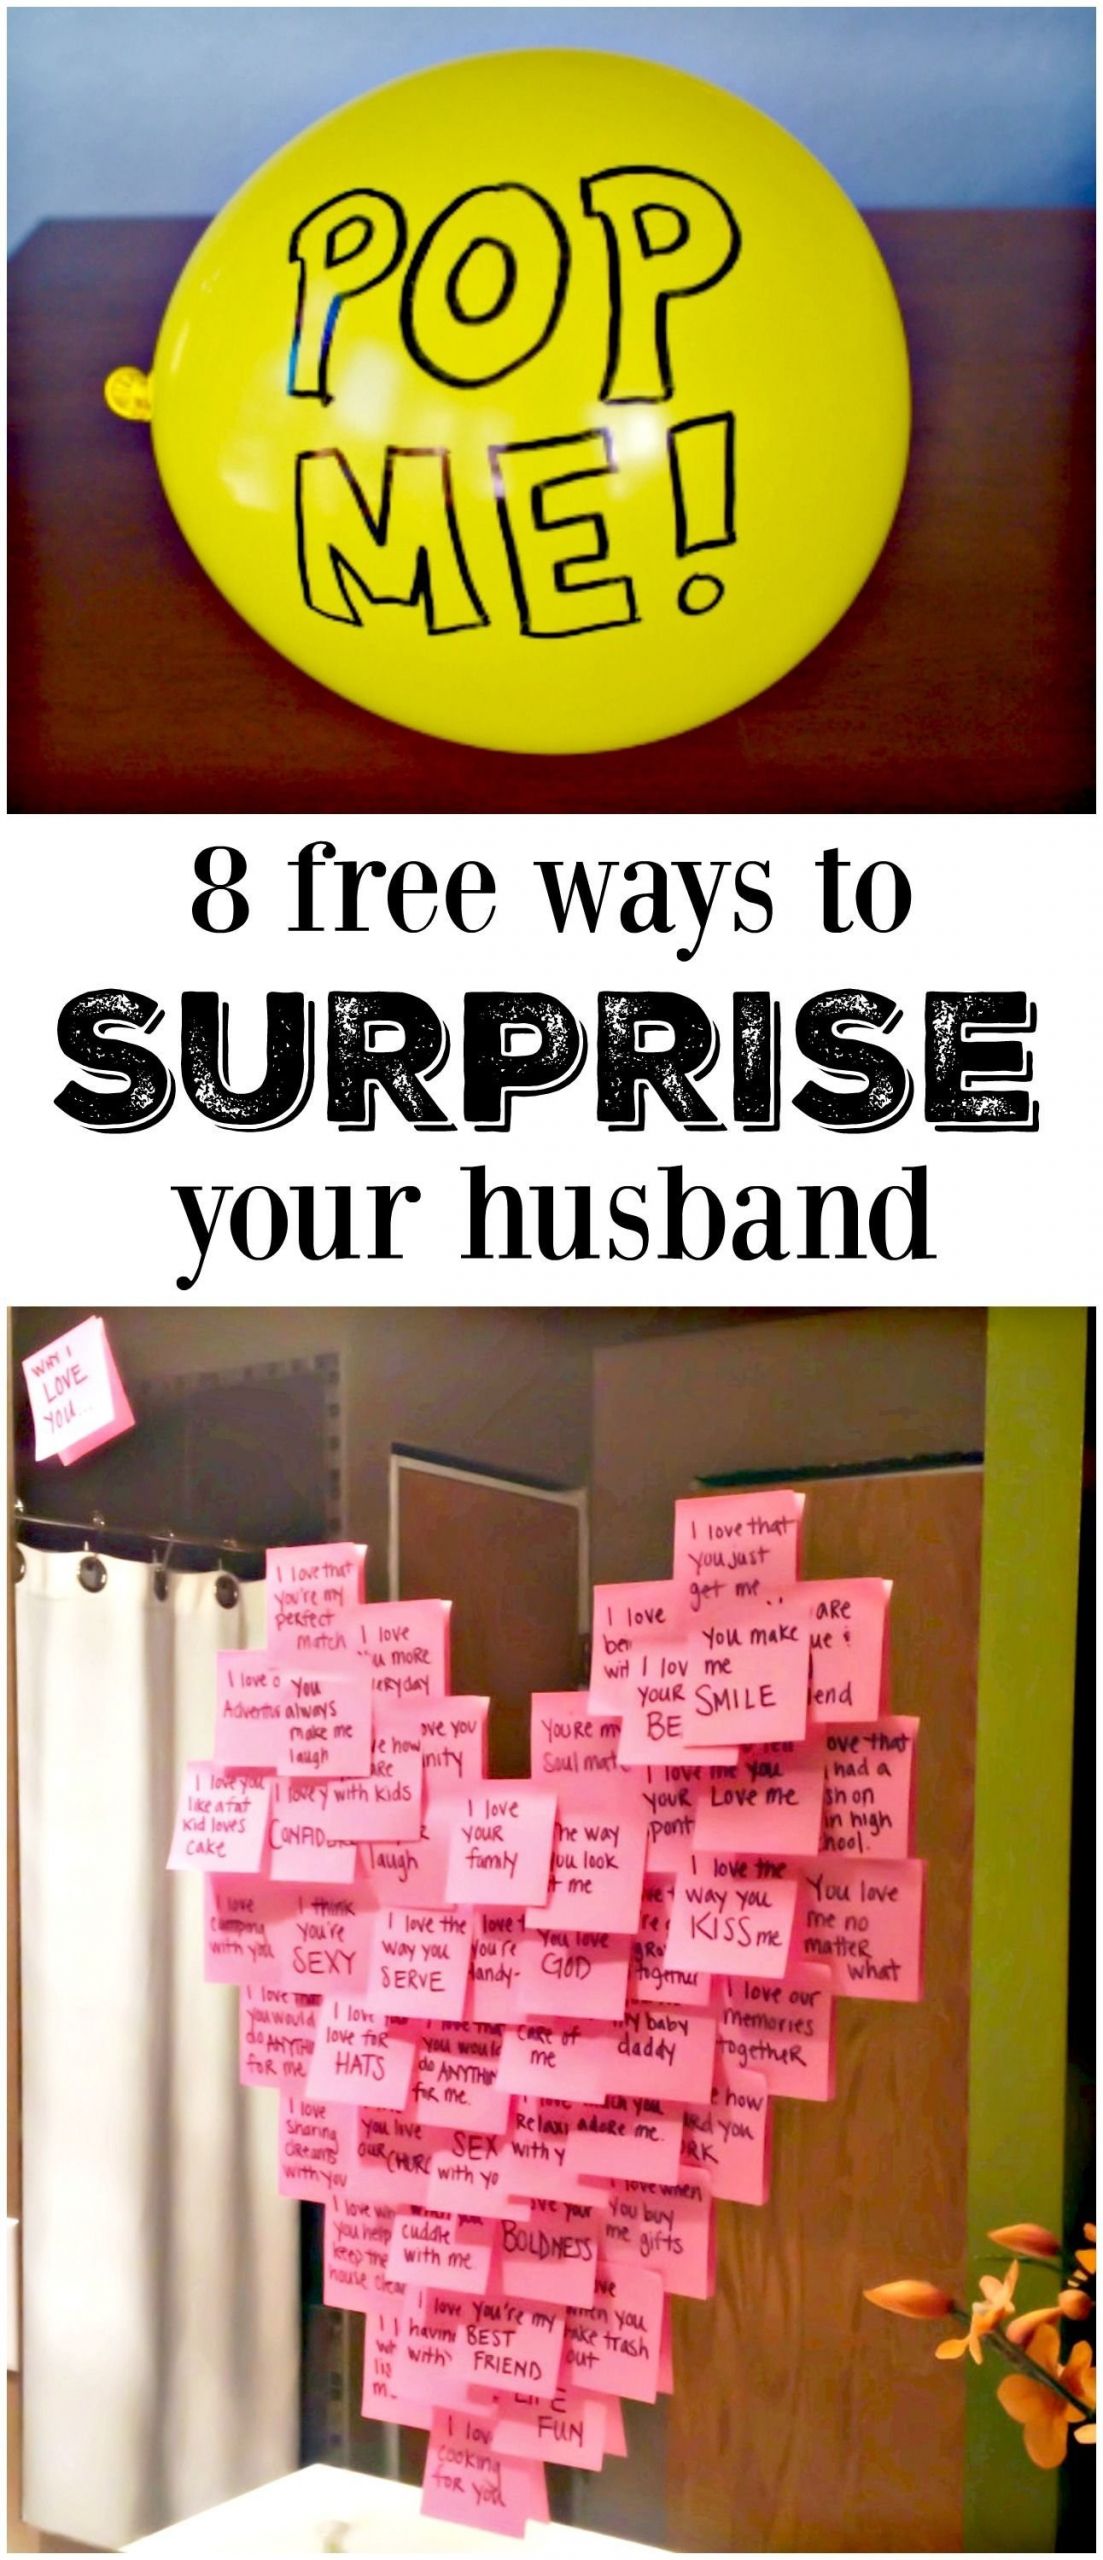 Birthday Gifts For Husband
 10 Amazing Creative Birthday Ideas For Husband 2019